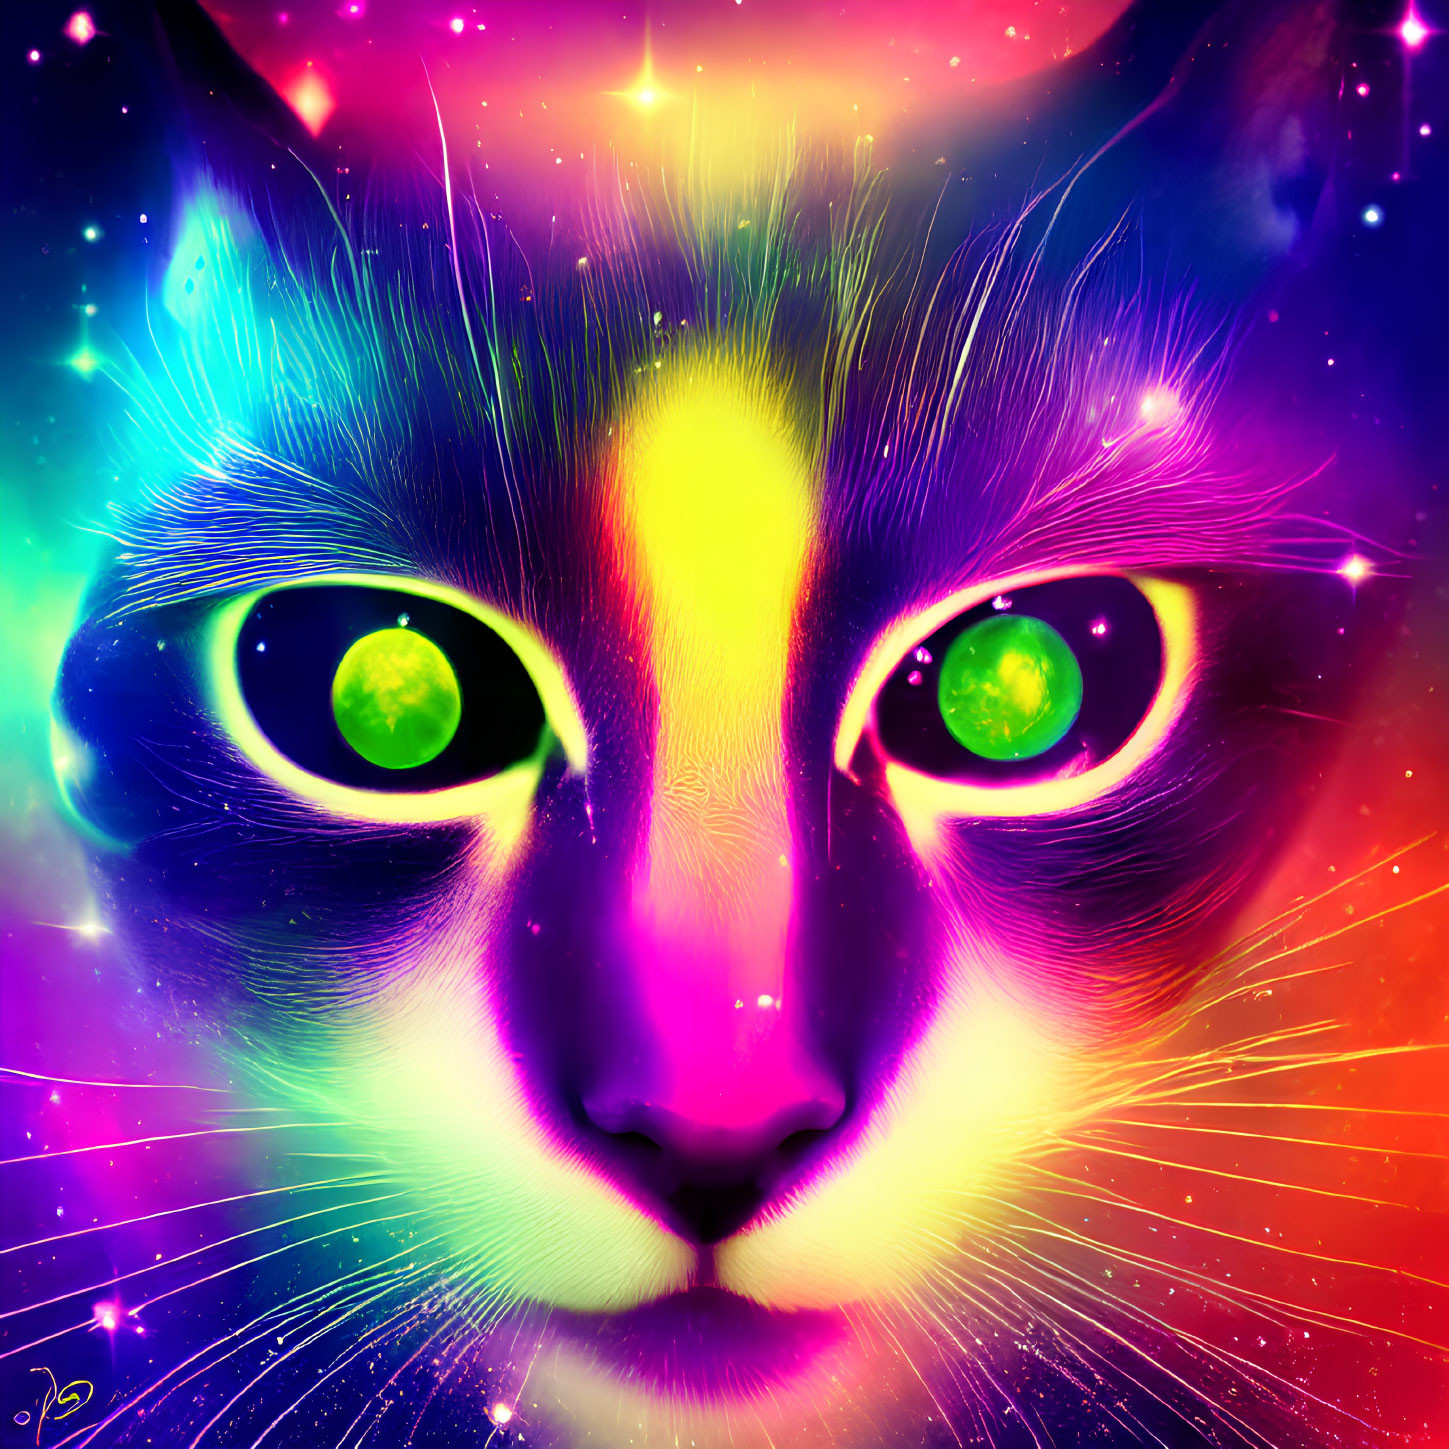 Colorful Digital Illustration of Cat with Neon Hues on Starry Background